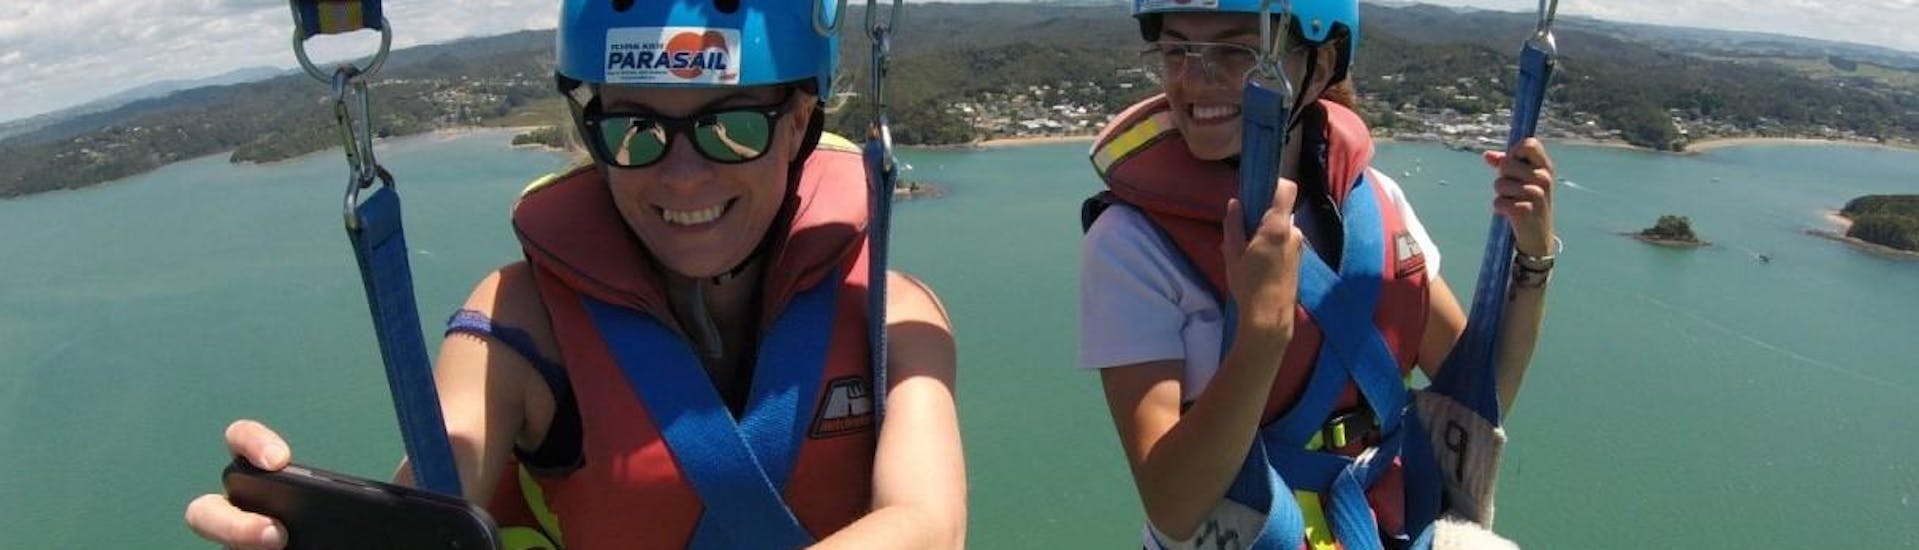 During the Parasailing in Paihia - For 2 People, two friends are enjoying the amazing views while being towed by a motorboat from Bay of Islands Parasail.